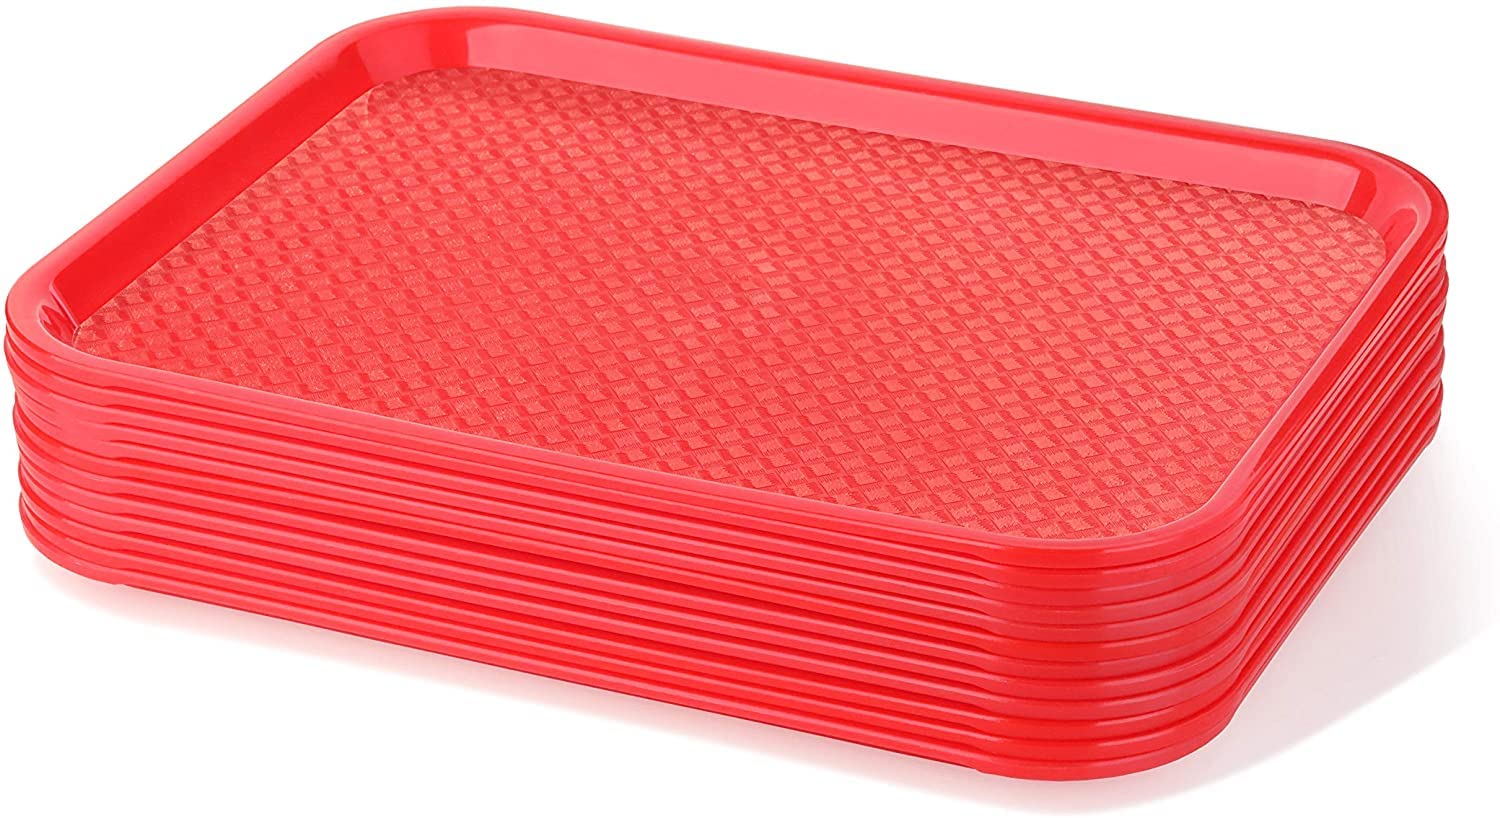 NJ Plastic Serving Platter Large Tray Unbreakable Snacks Tea Serving Tray Red Drink Breakfast Tea Dinner Coffee Salad Food for Dinning Table Home Kitchen (16 X 12 Inches) : Red 8 Pcs.